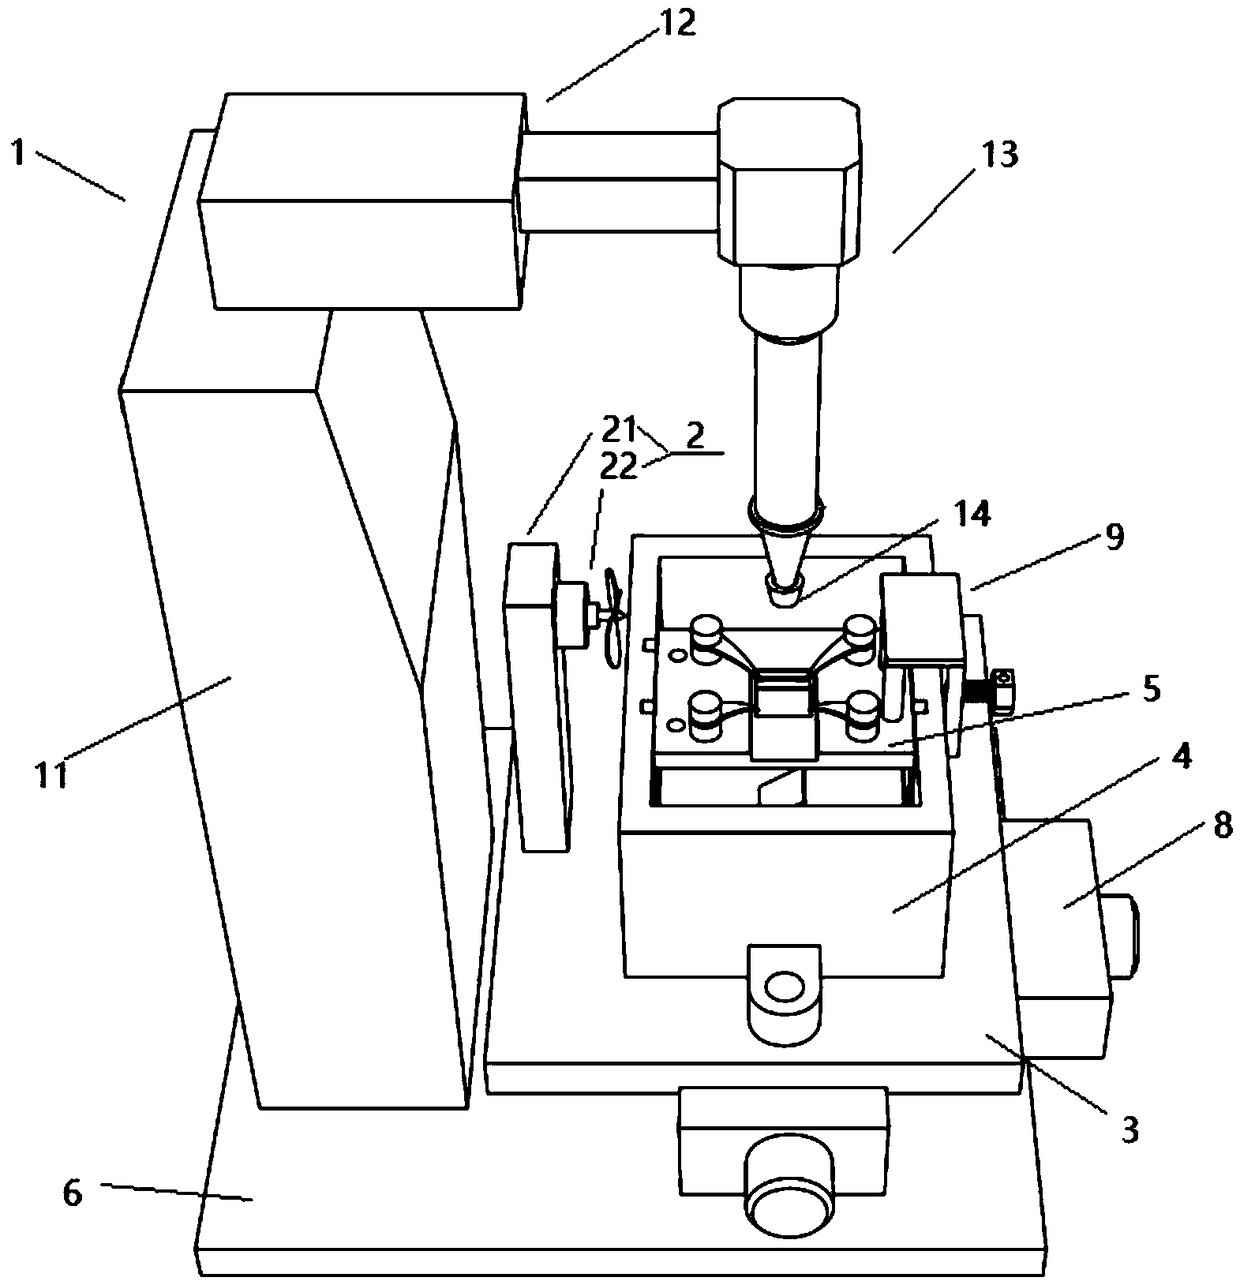 Auxiliary laser repeating punching method and device for ceramics based on static solution